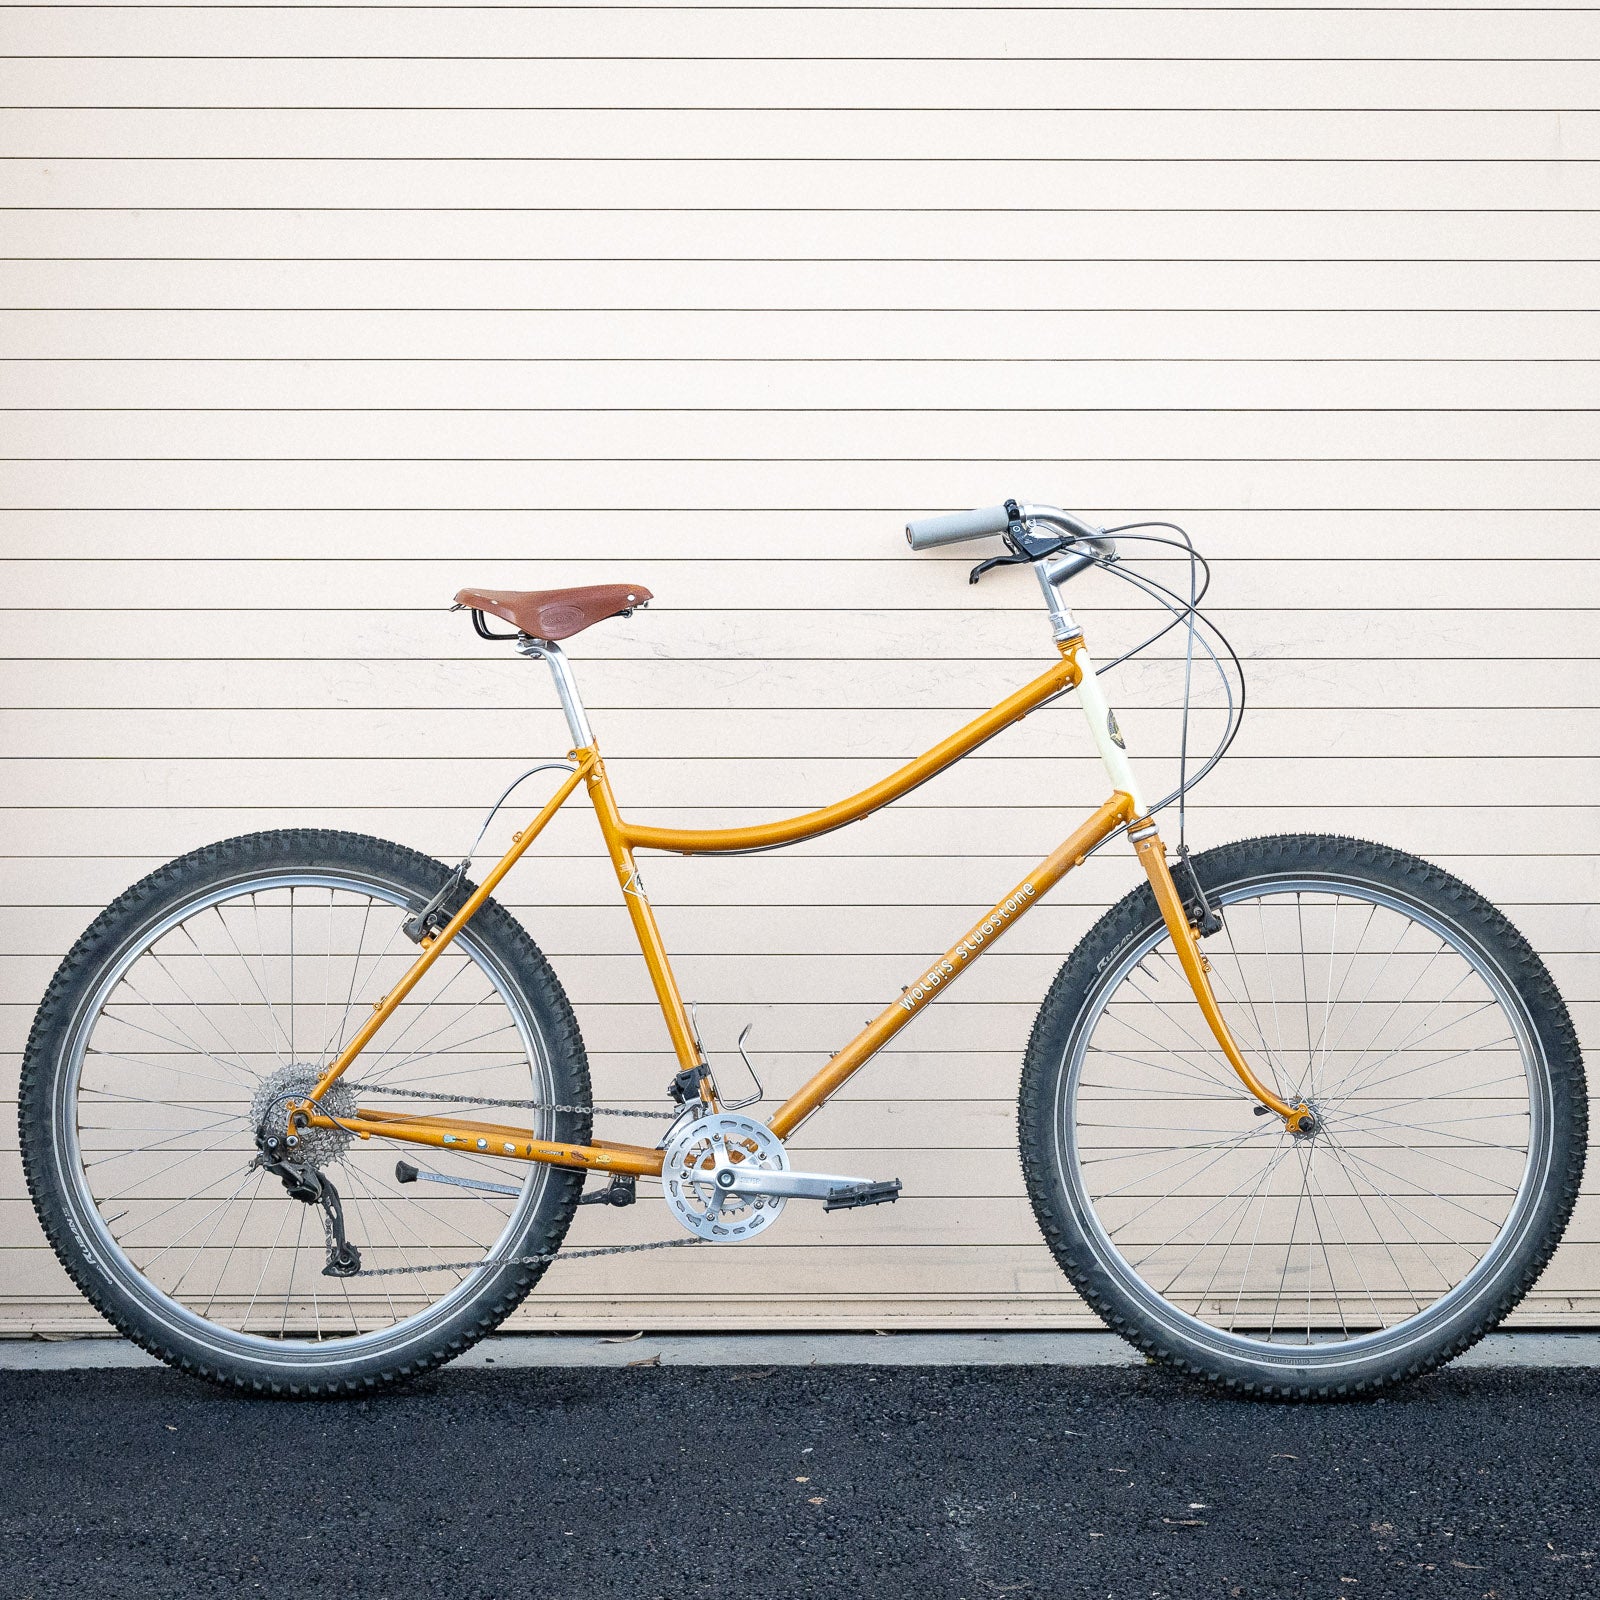 Rivendell Bicycle Works - Lugged Steel and Custom Bikes